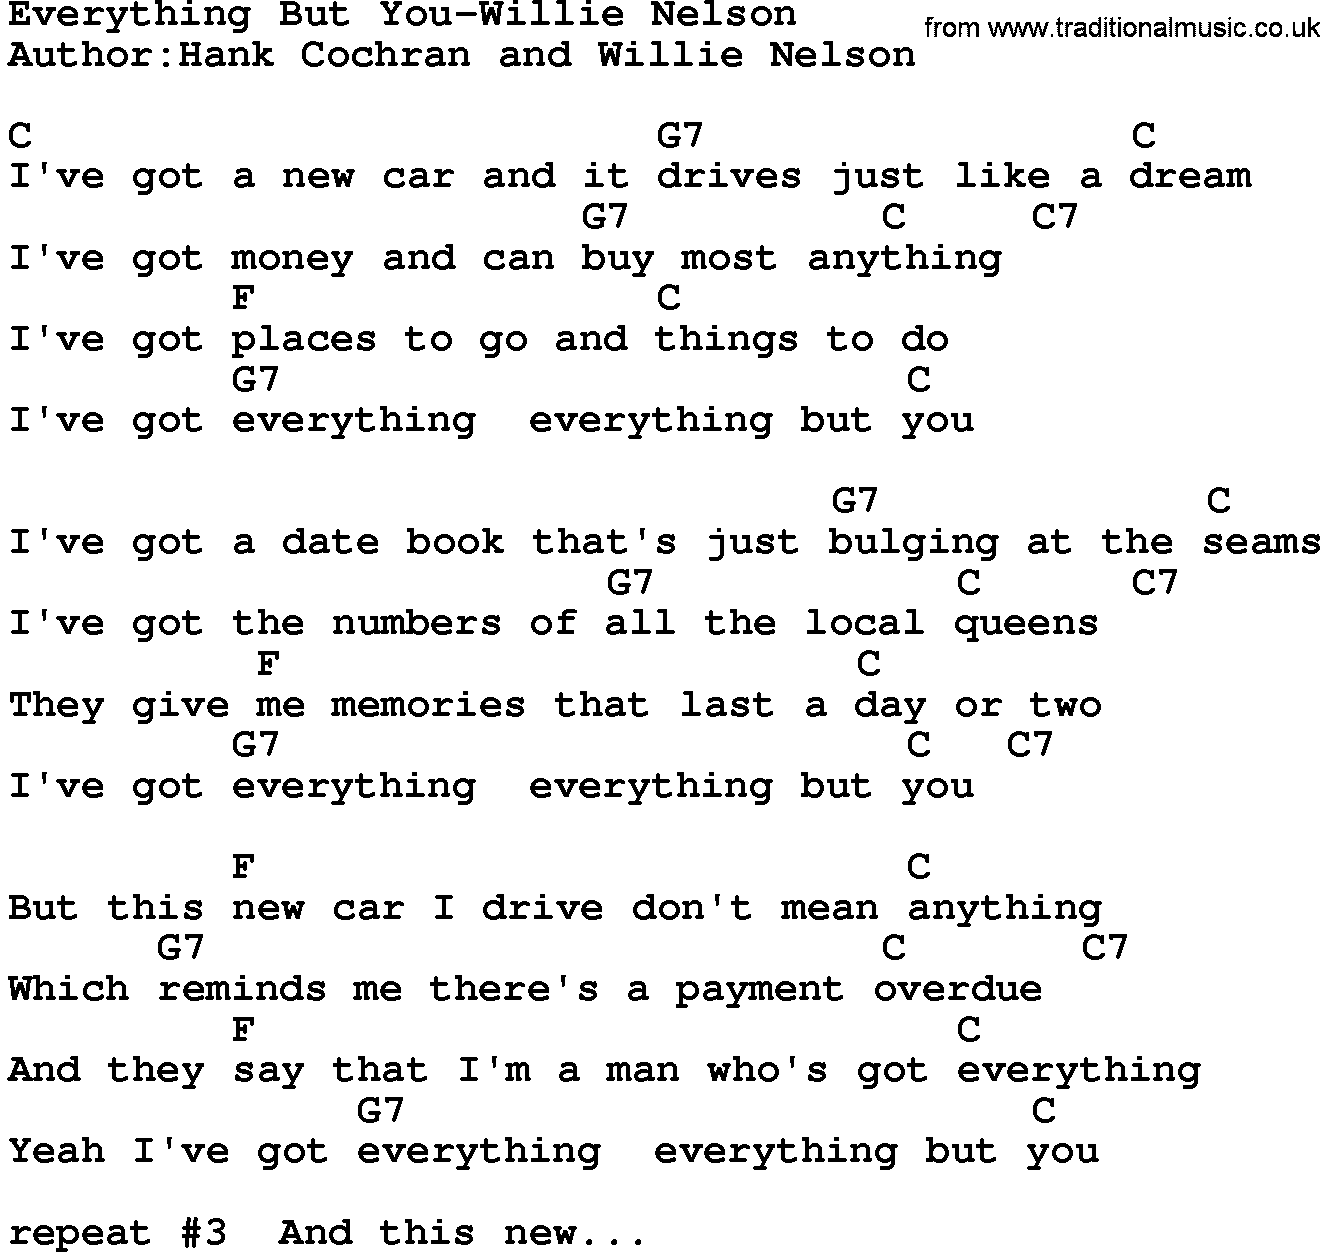 Country music song: Everything But You-Willie Nelson lyrics and chords